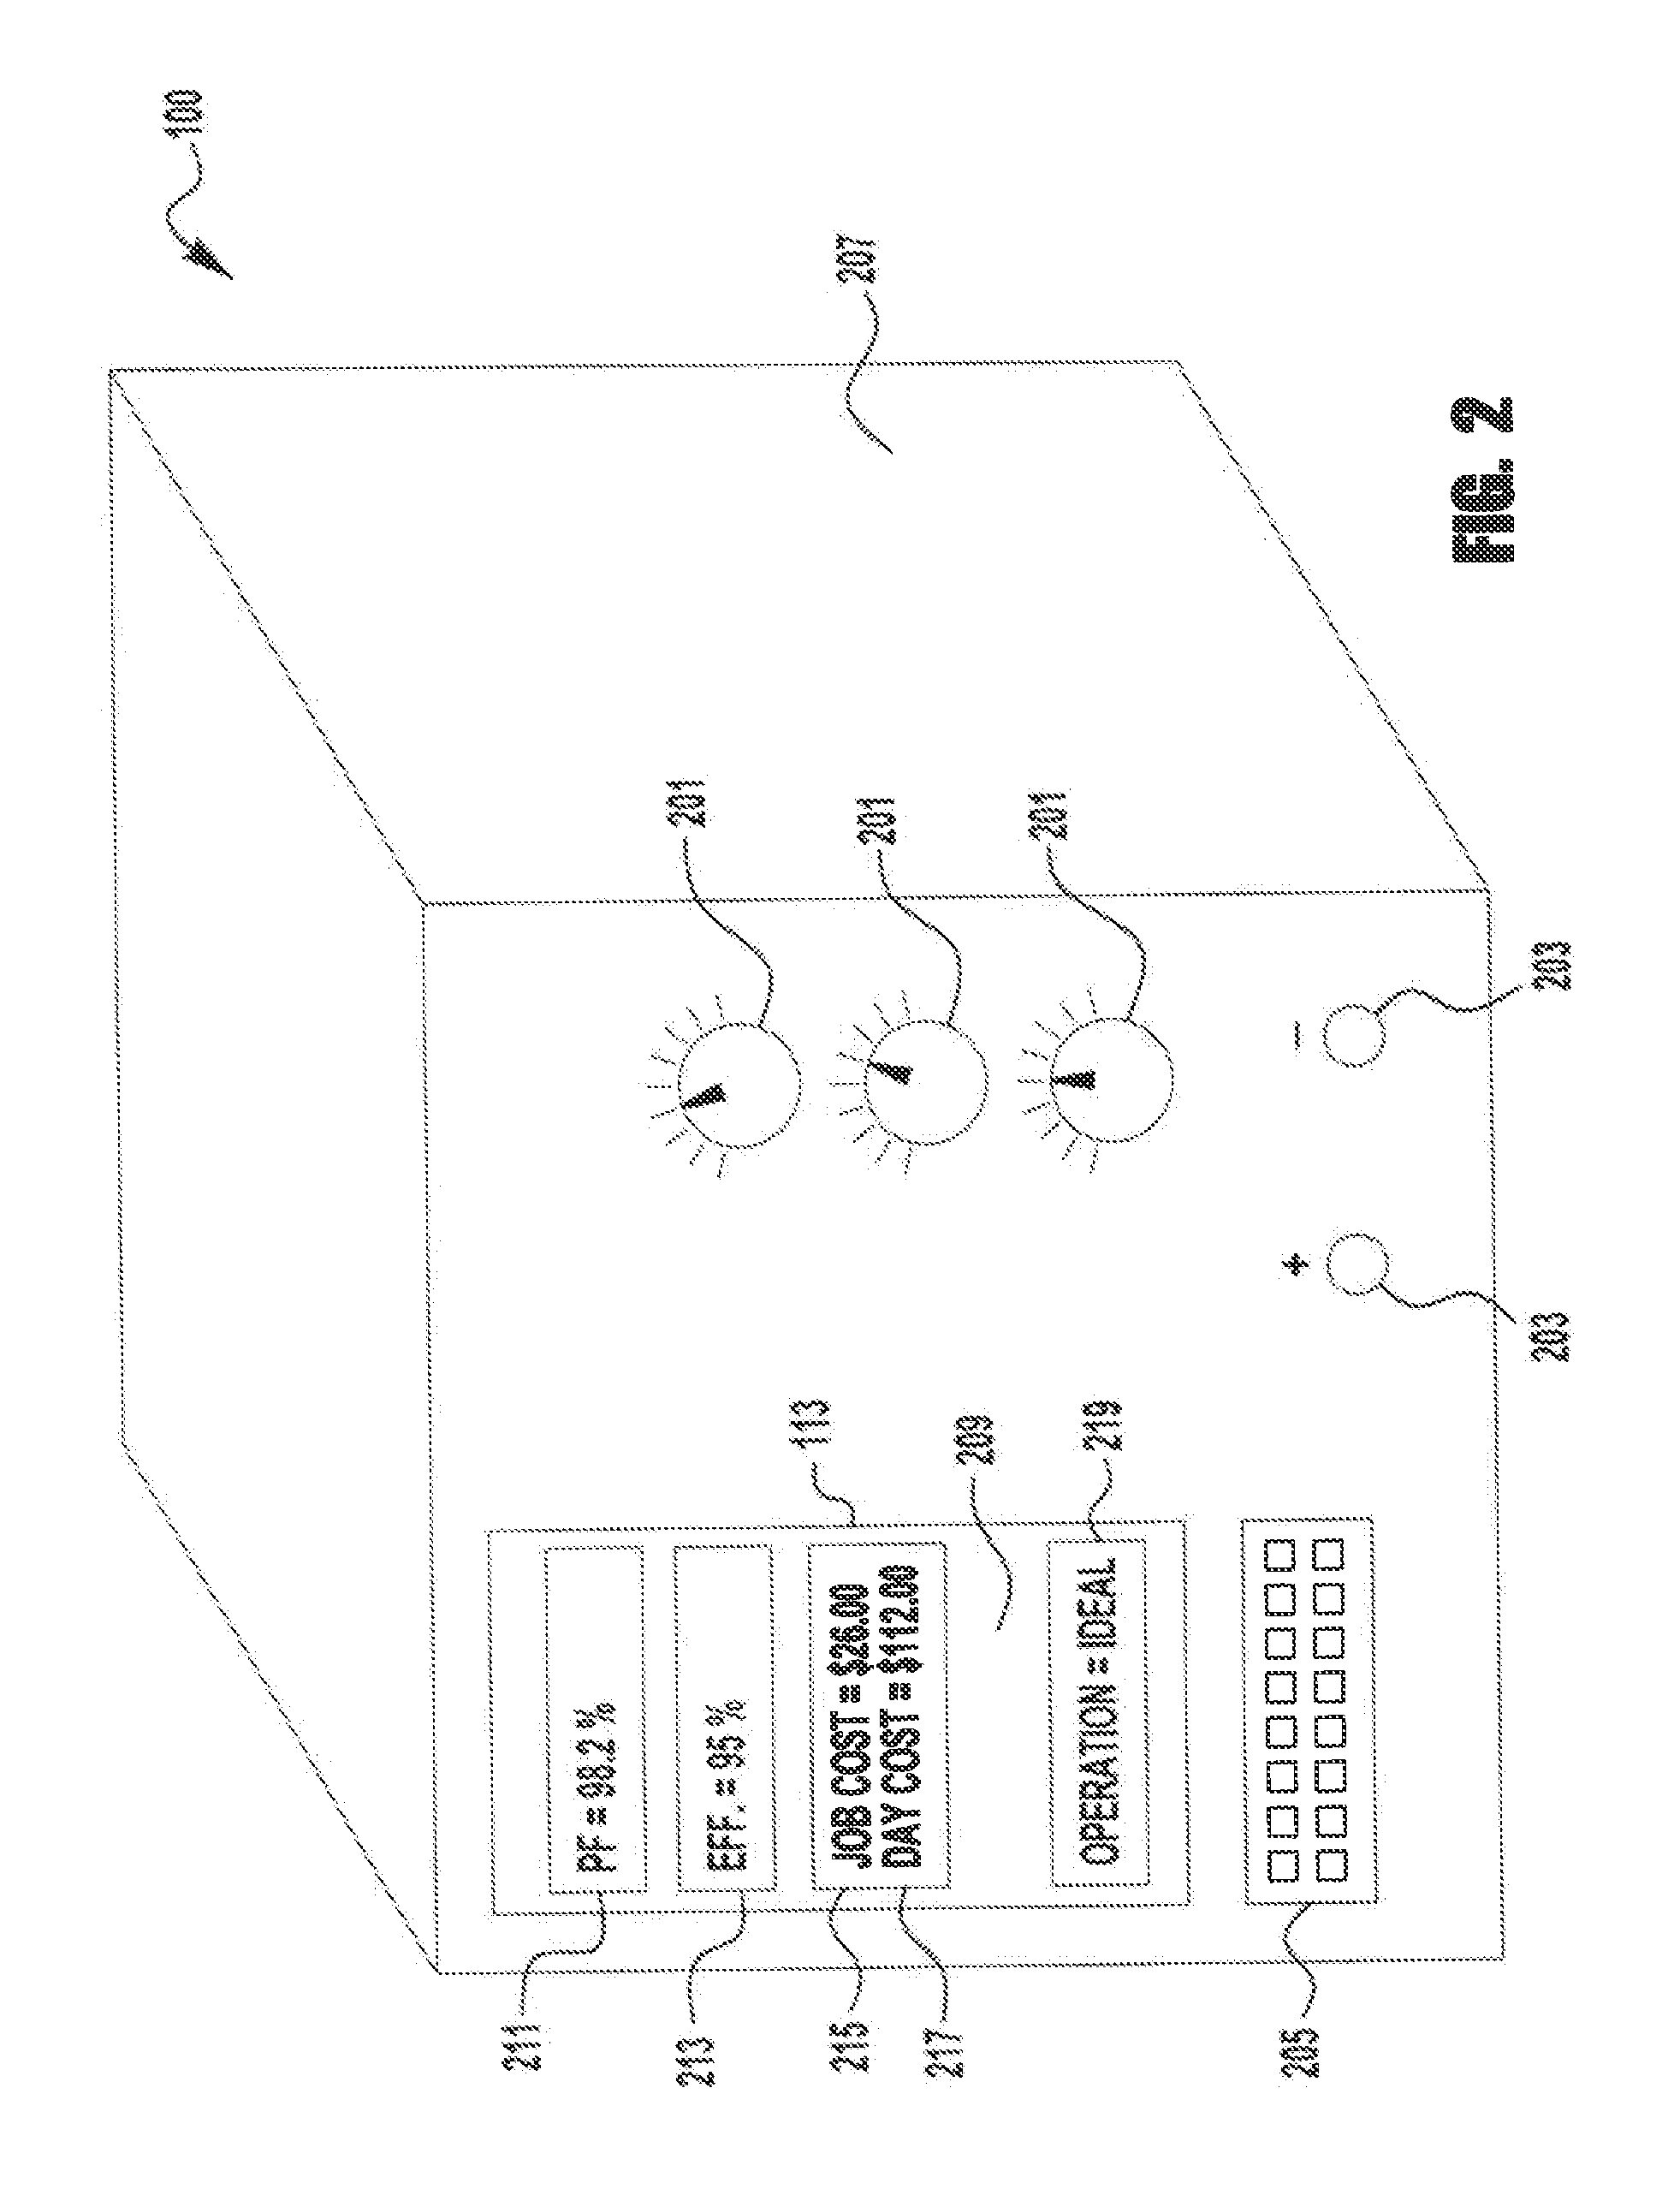 System and method for real-time computation and reporting of welding machine performance and metrics